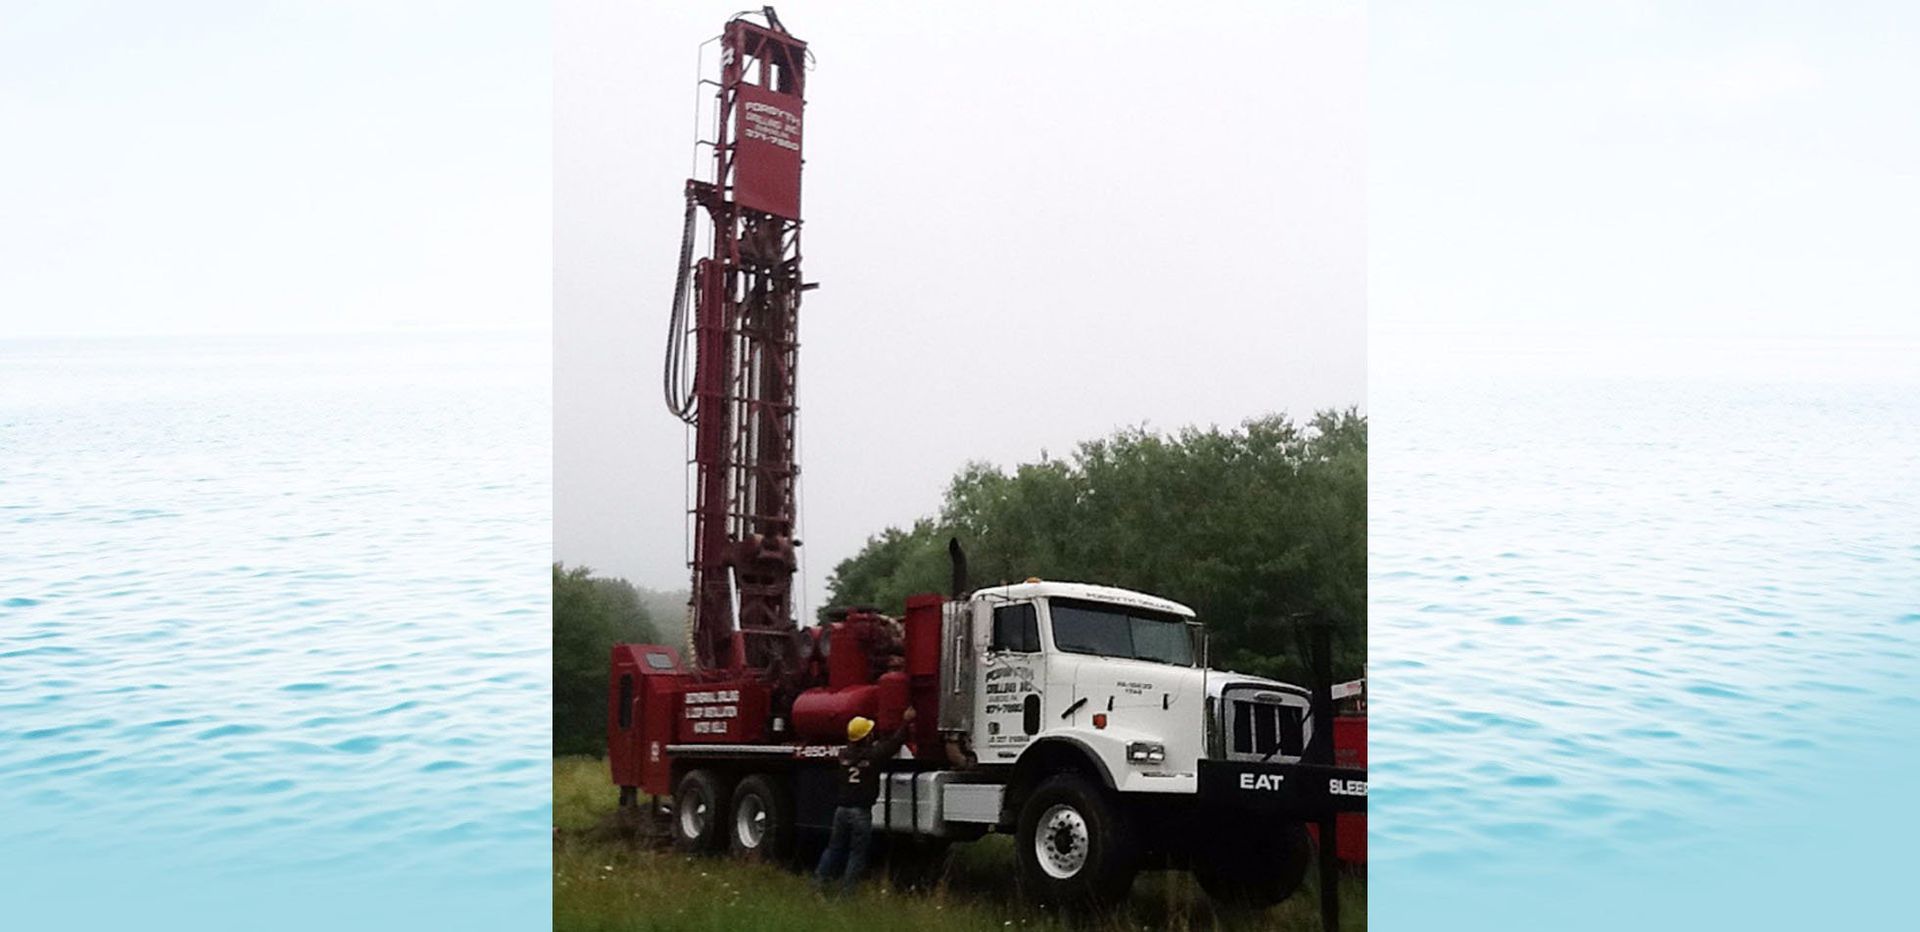 Geothermal Drilling Services